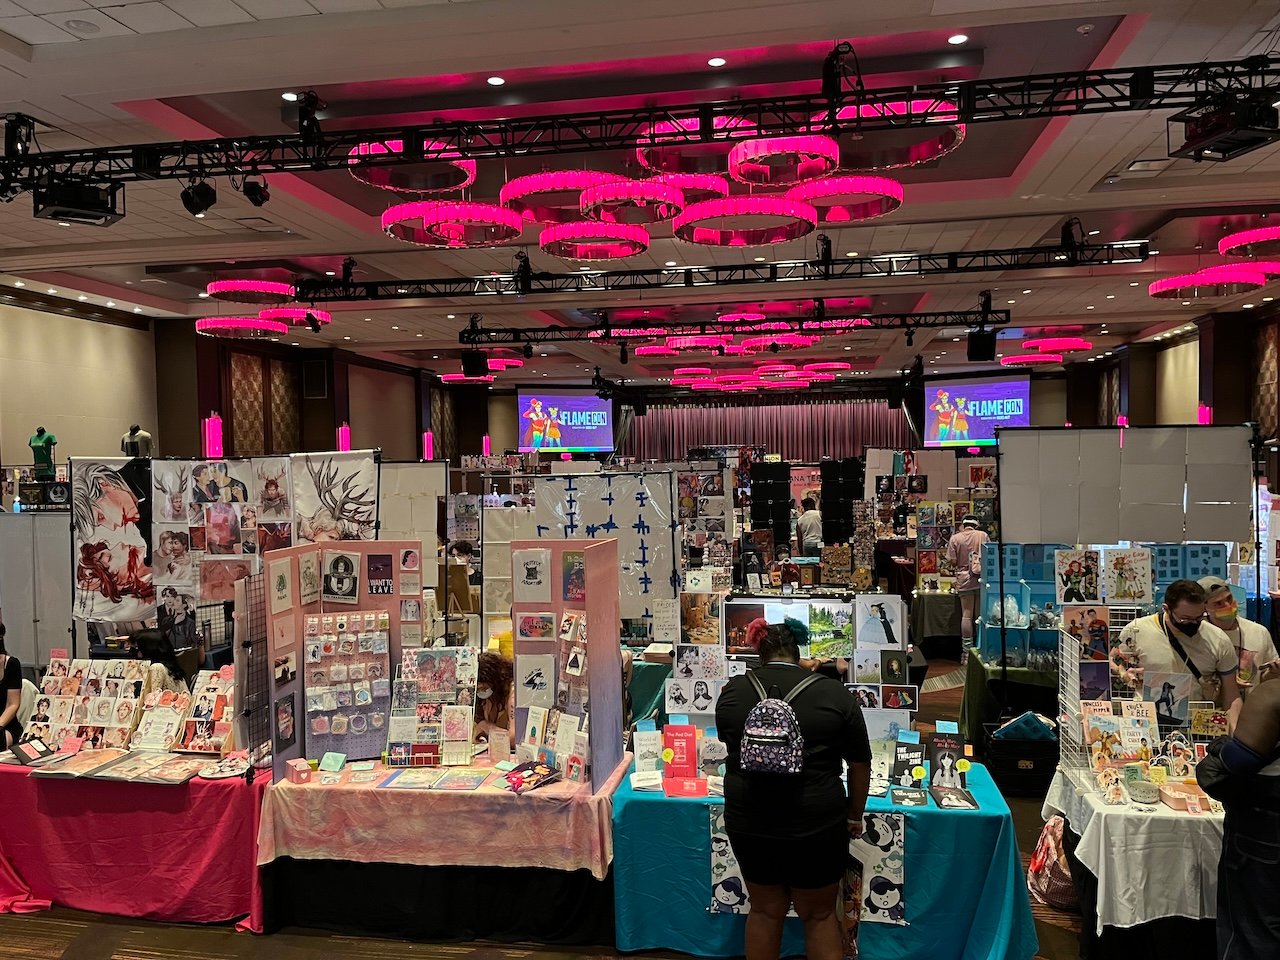 Show floor at Flame Con.